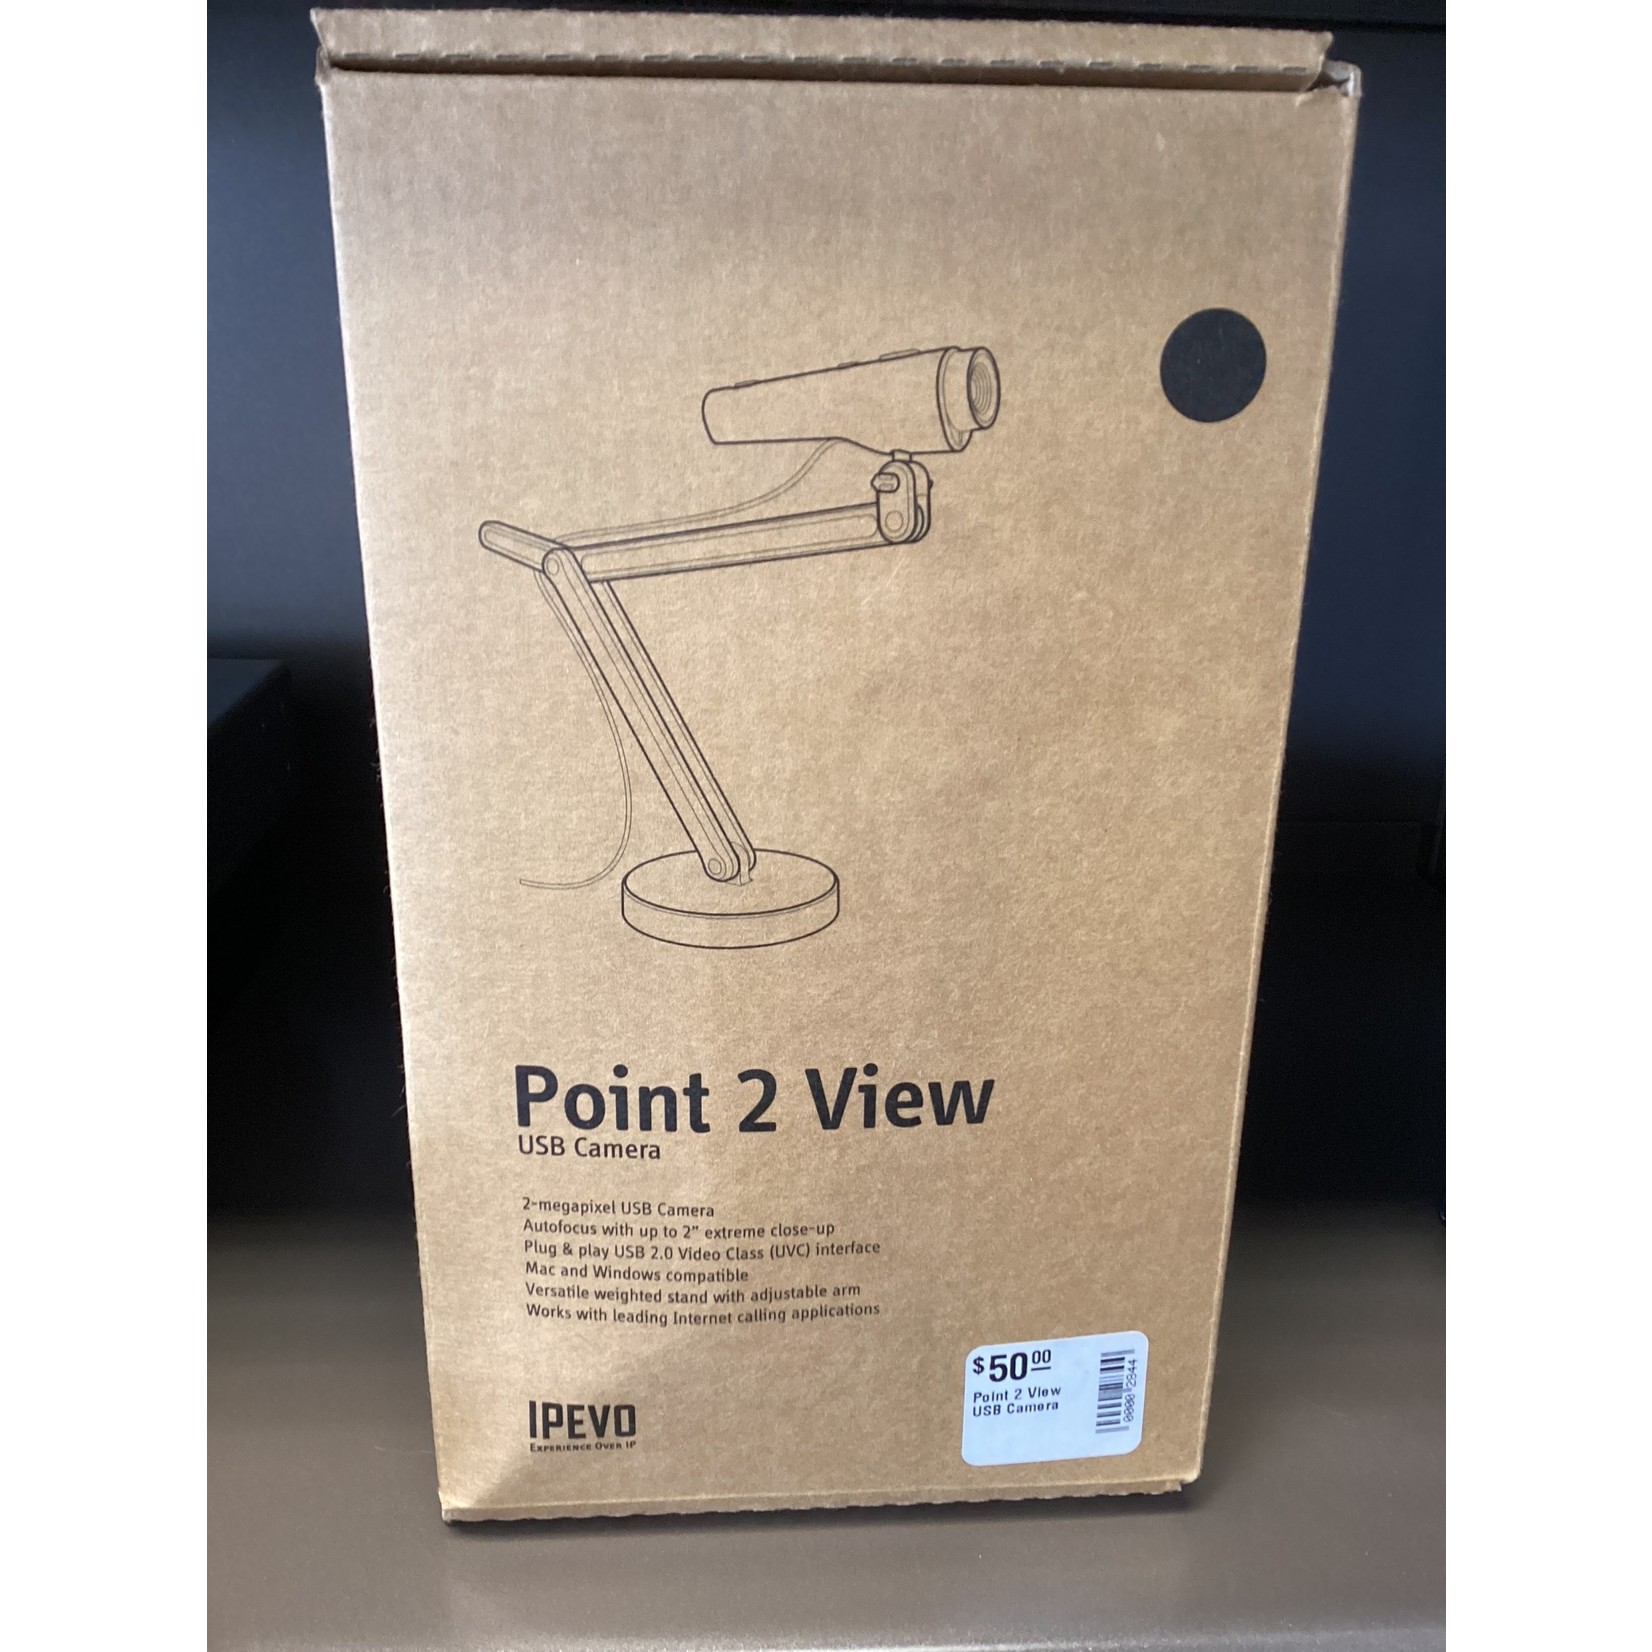 Point 2 View USB Camera